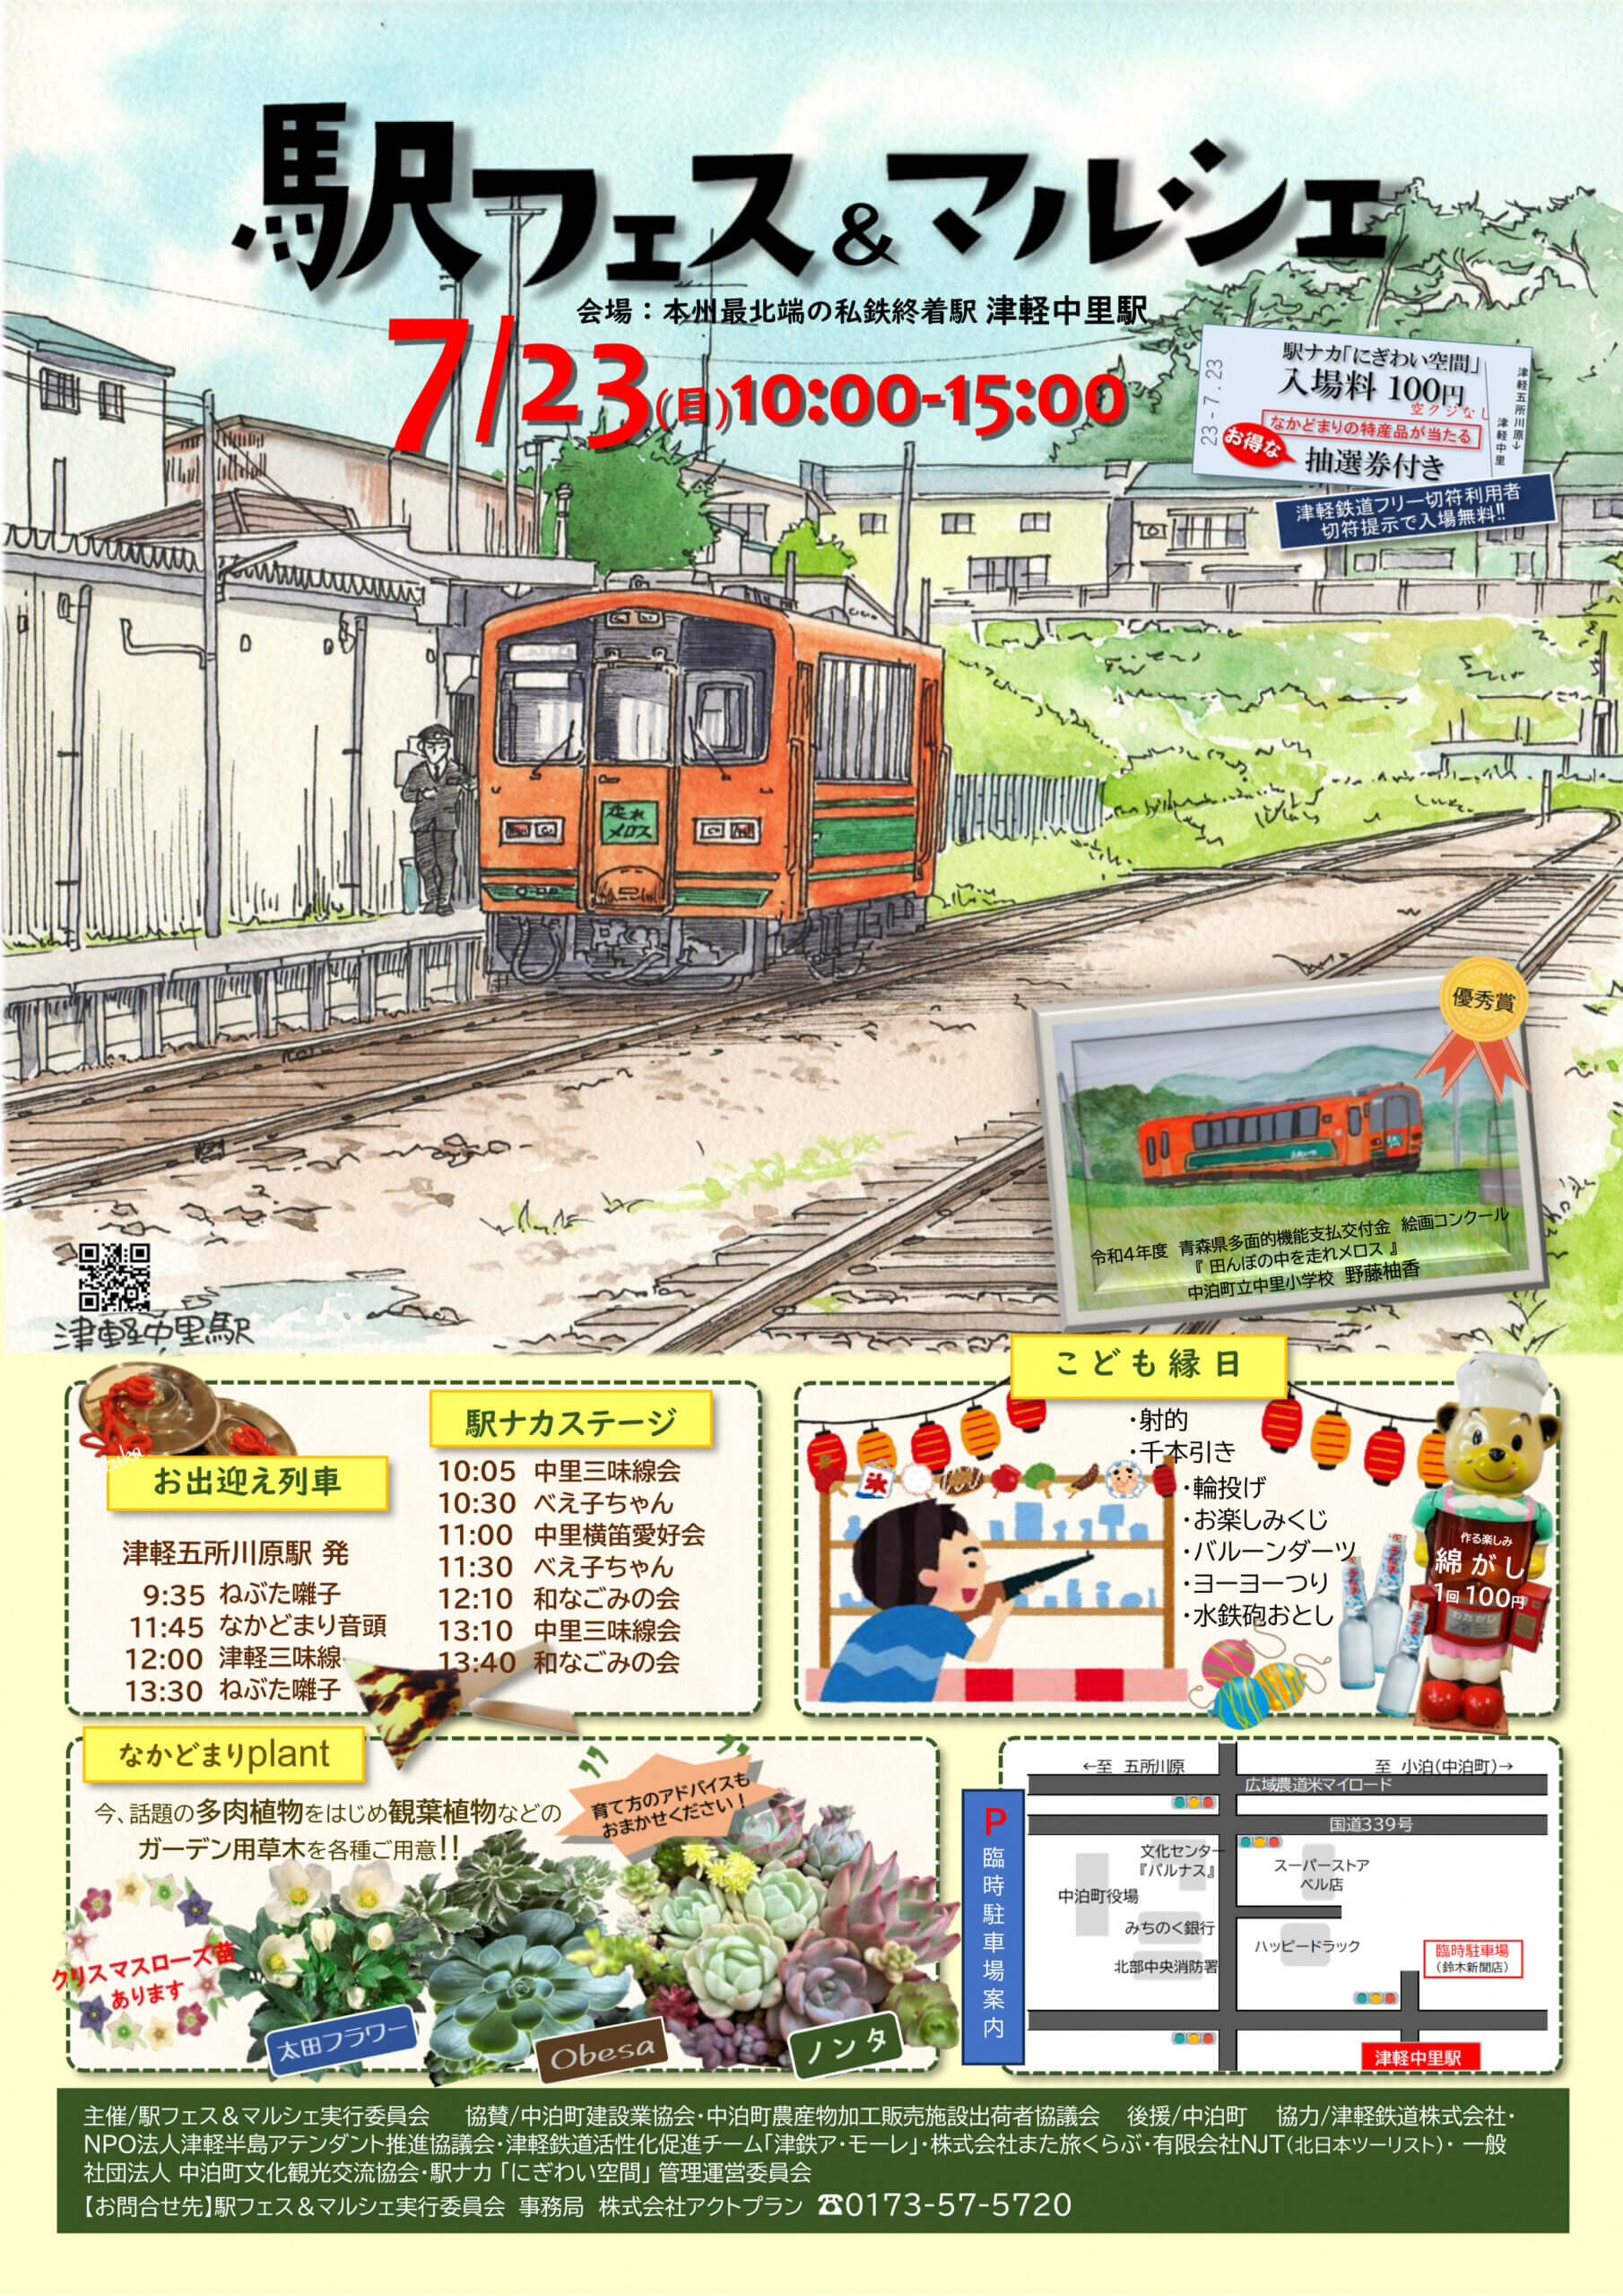 Featured image for “駅フェス＆マルシェ　津軽イケ麺グルメが大集合！！　令和5年7月23日”